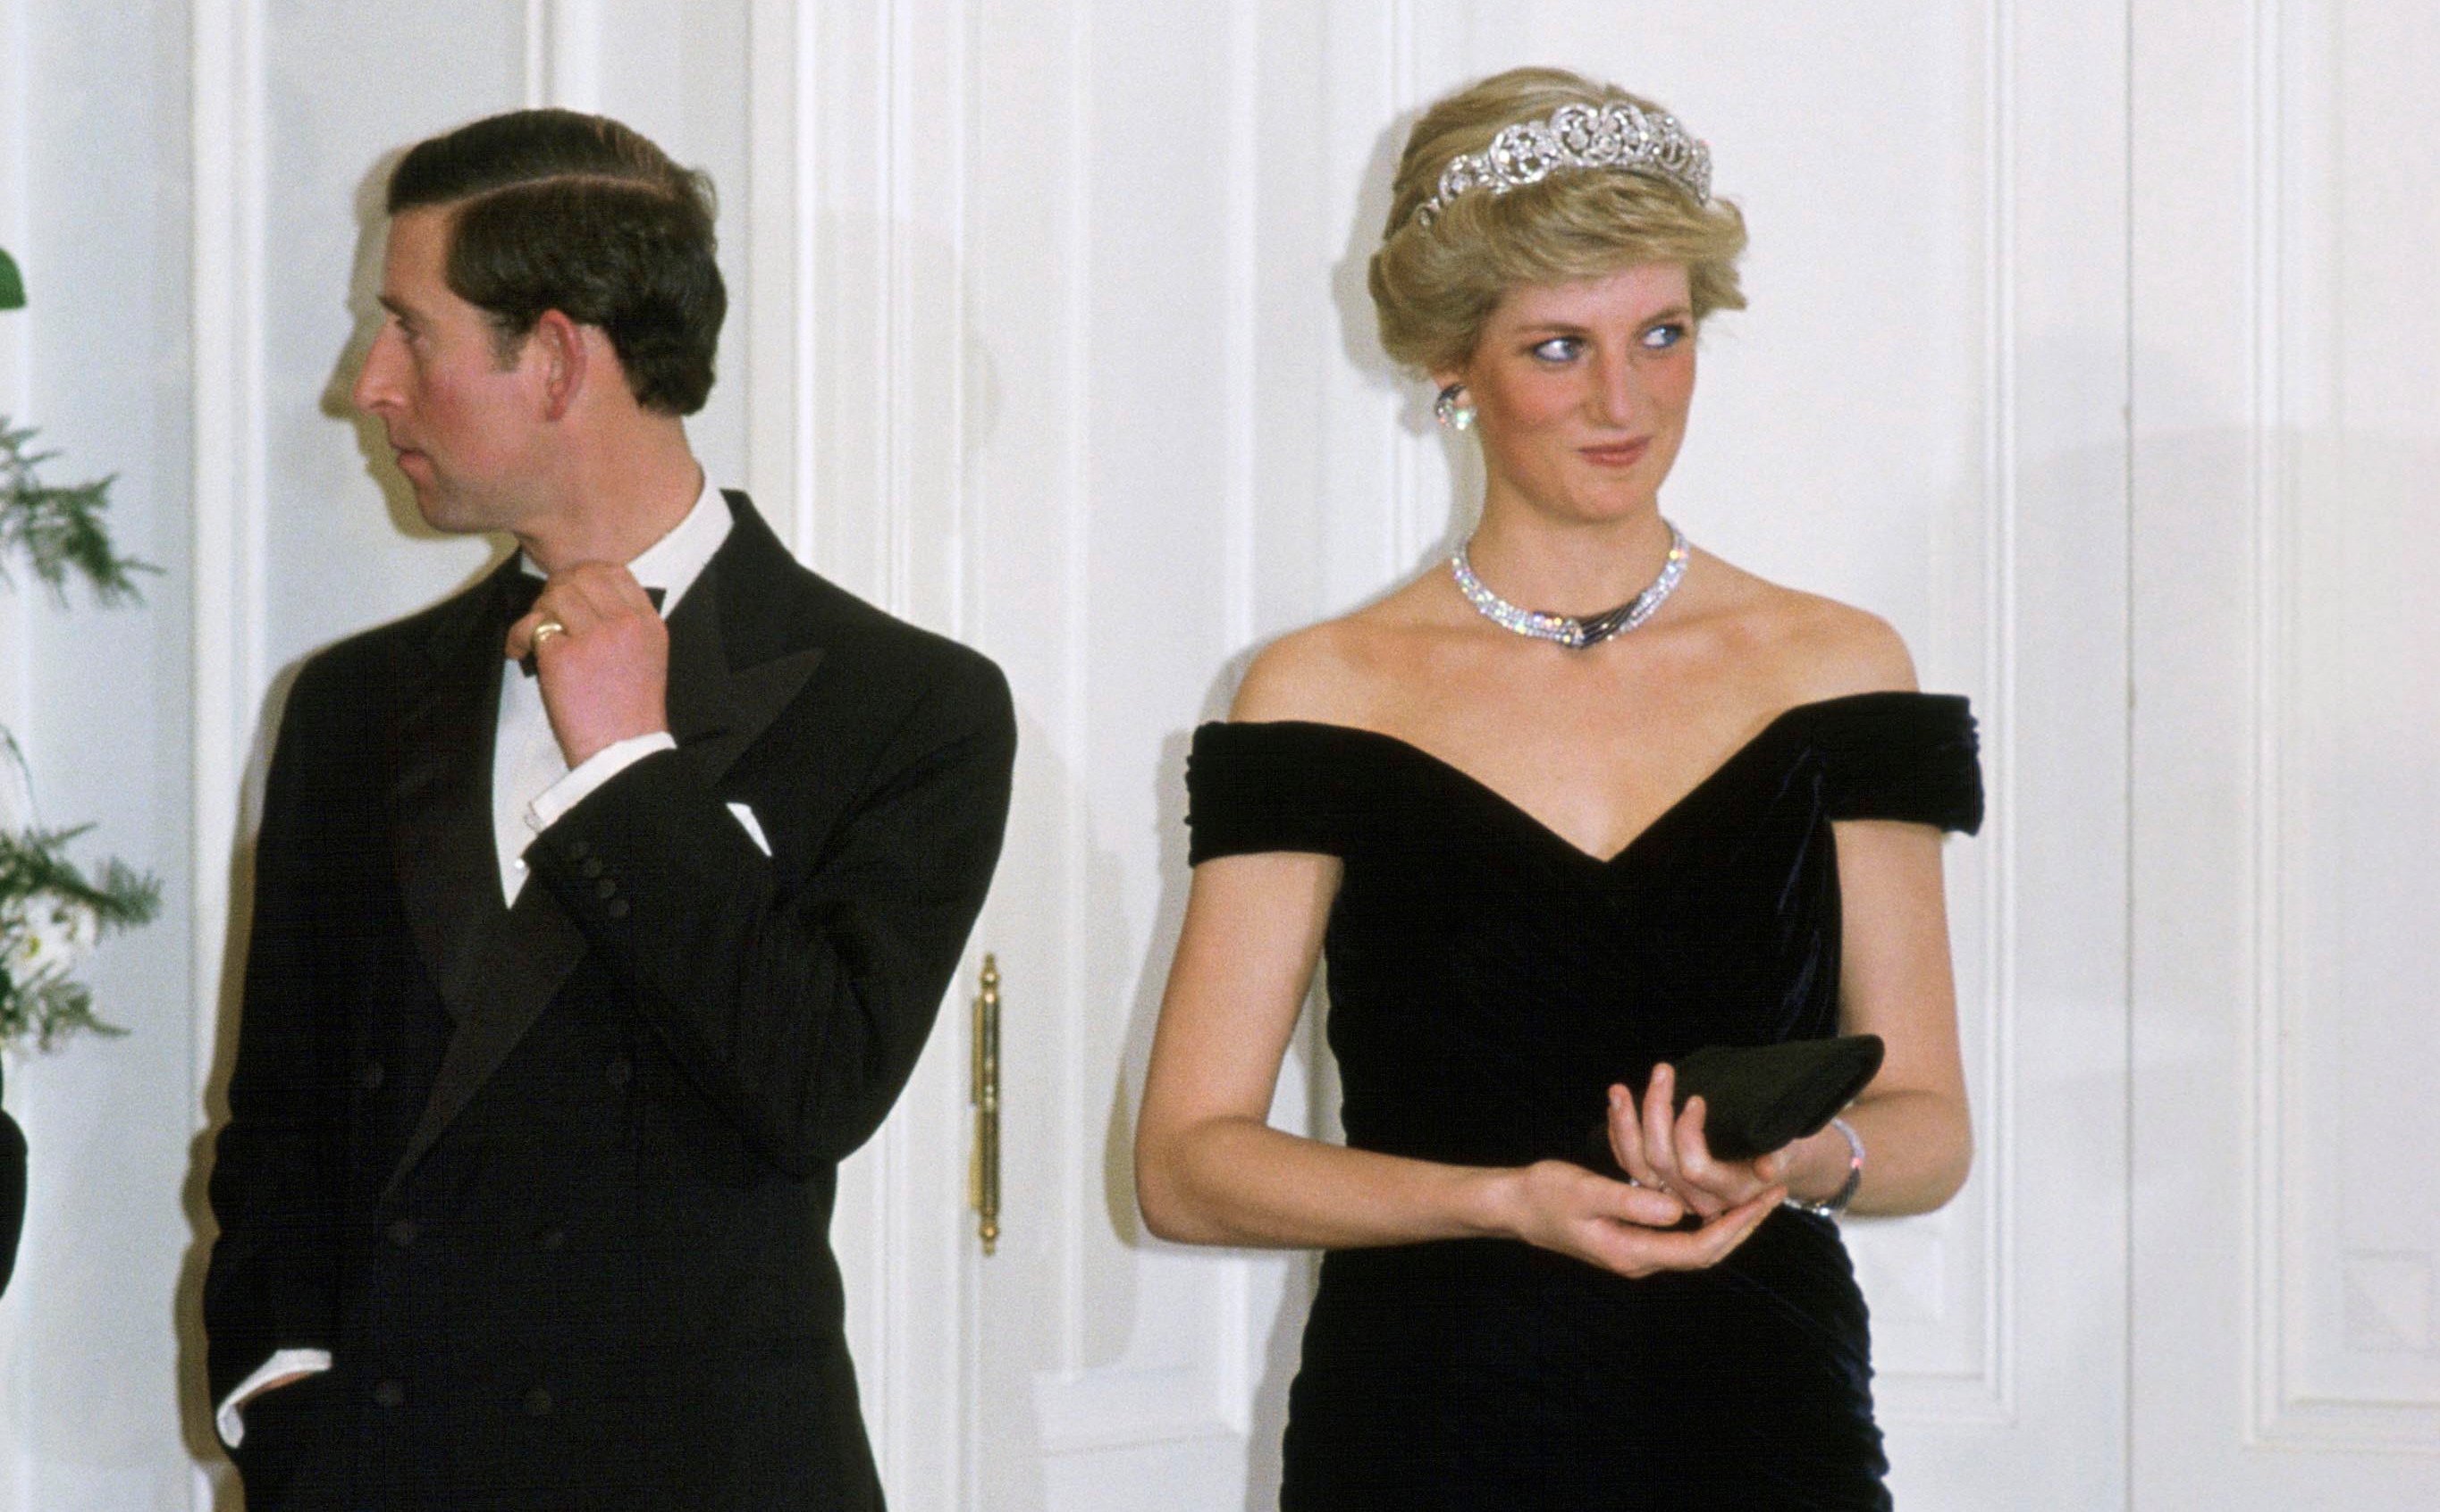 King Charles III and Princess Diana in 1987. A body language expert theorized there were early 'warning signs' of his 'lack of commitment' to her.